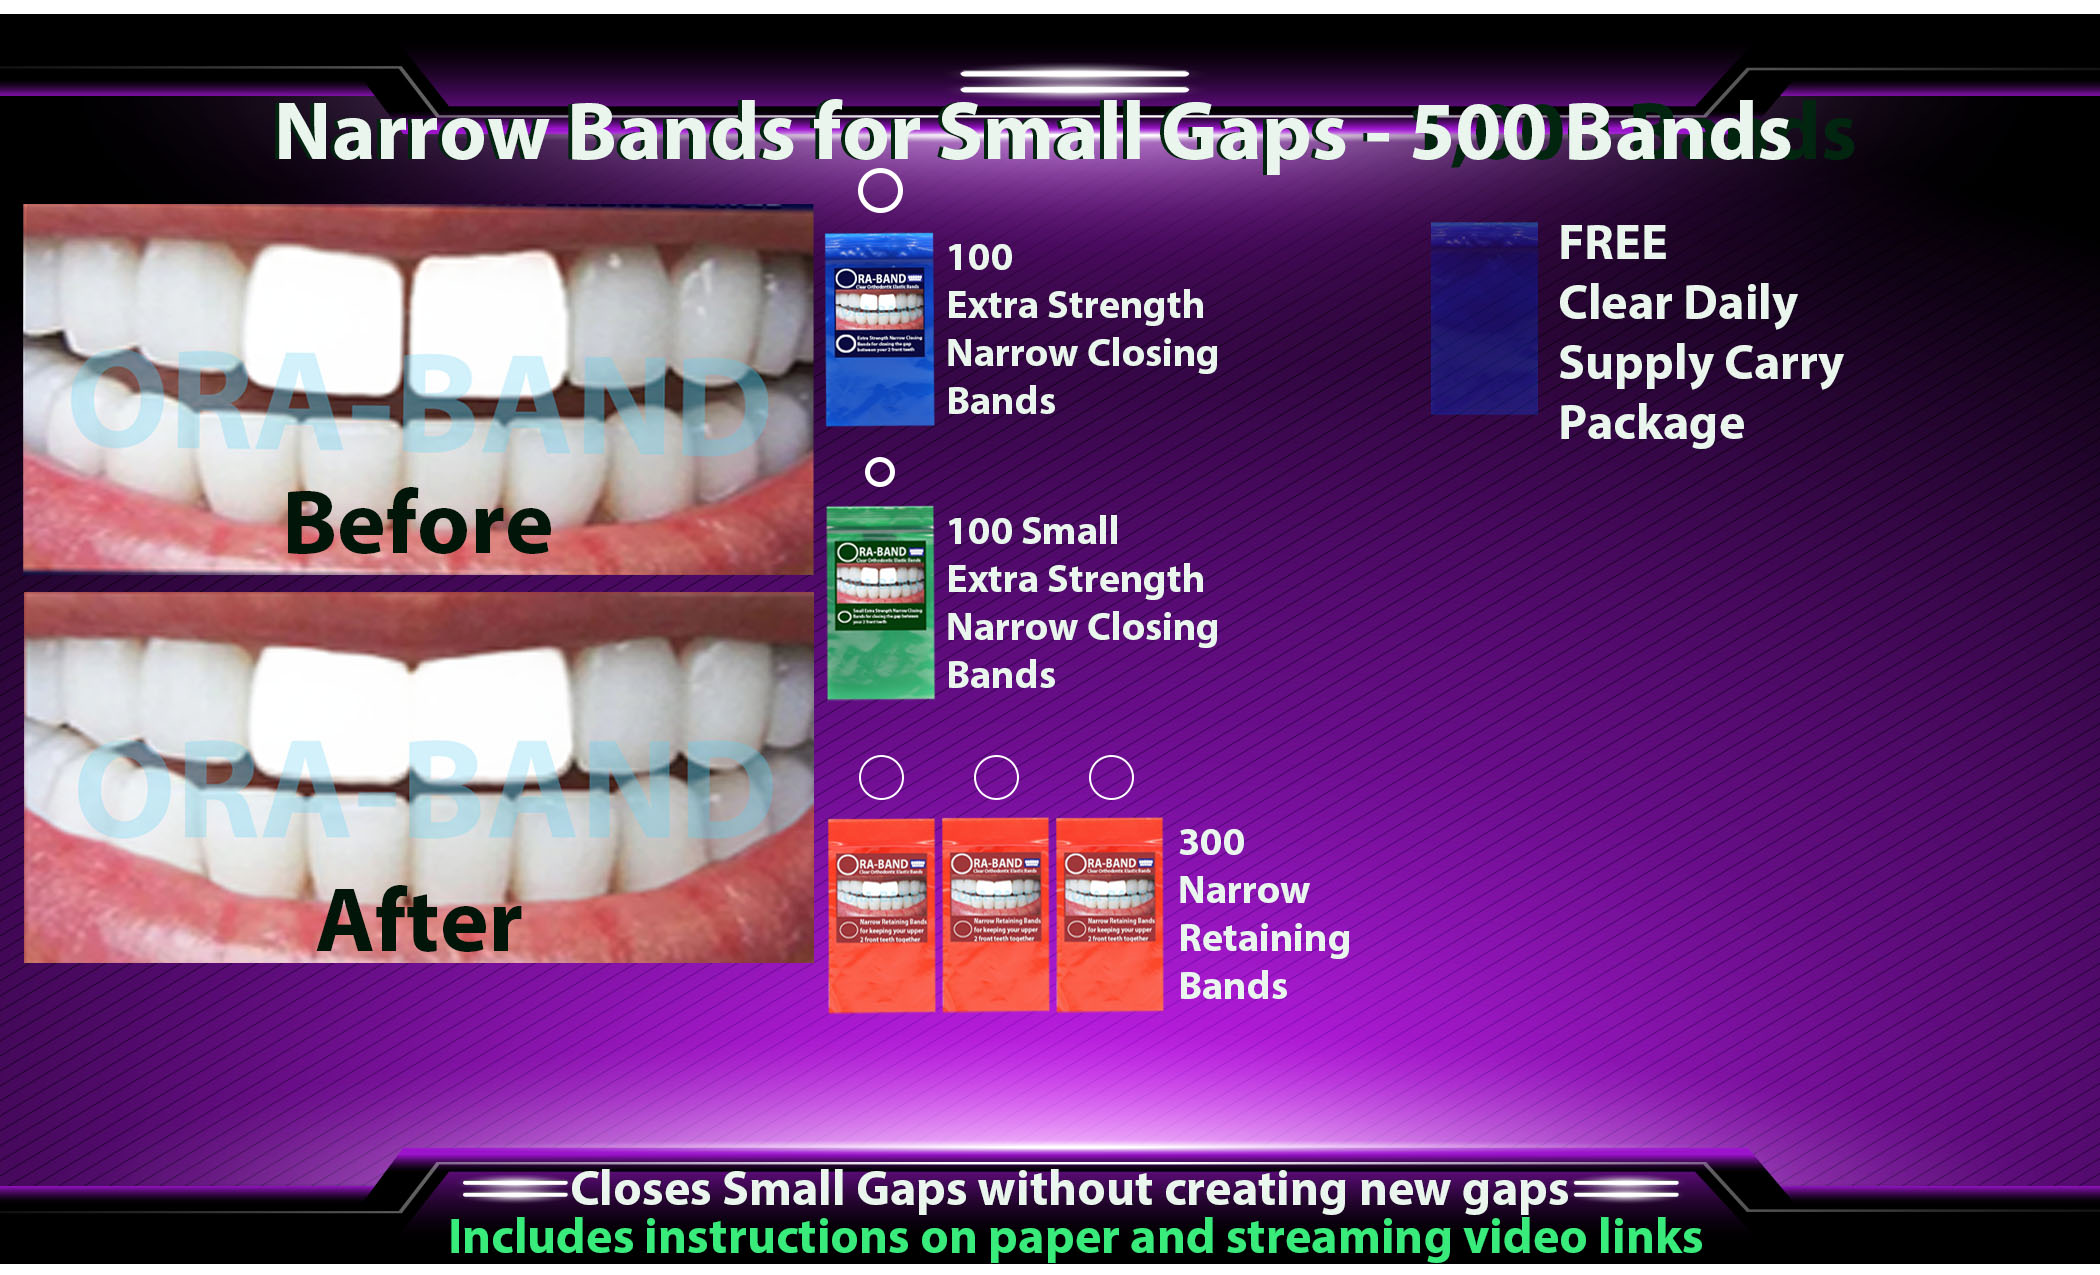 ORA-BAND 500 Band Narrow Bands Package for 
Small Gaps between your 2 front teeth